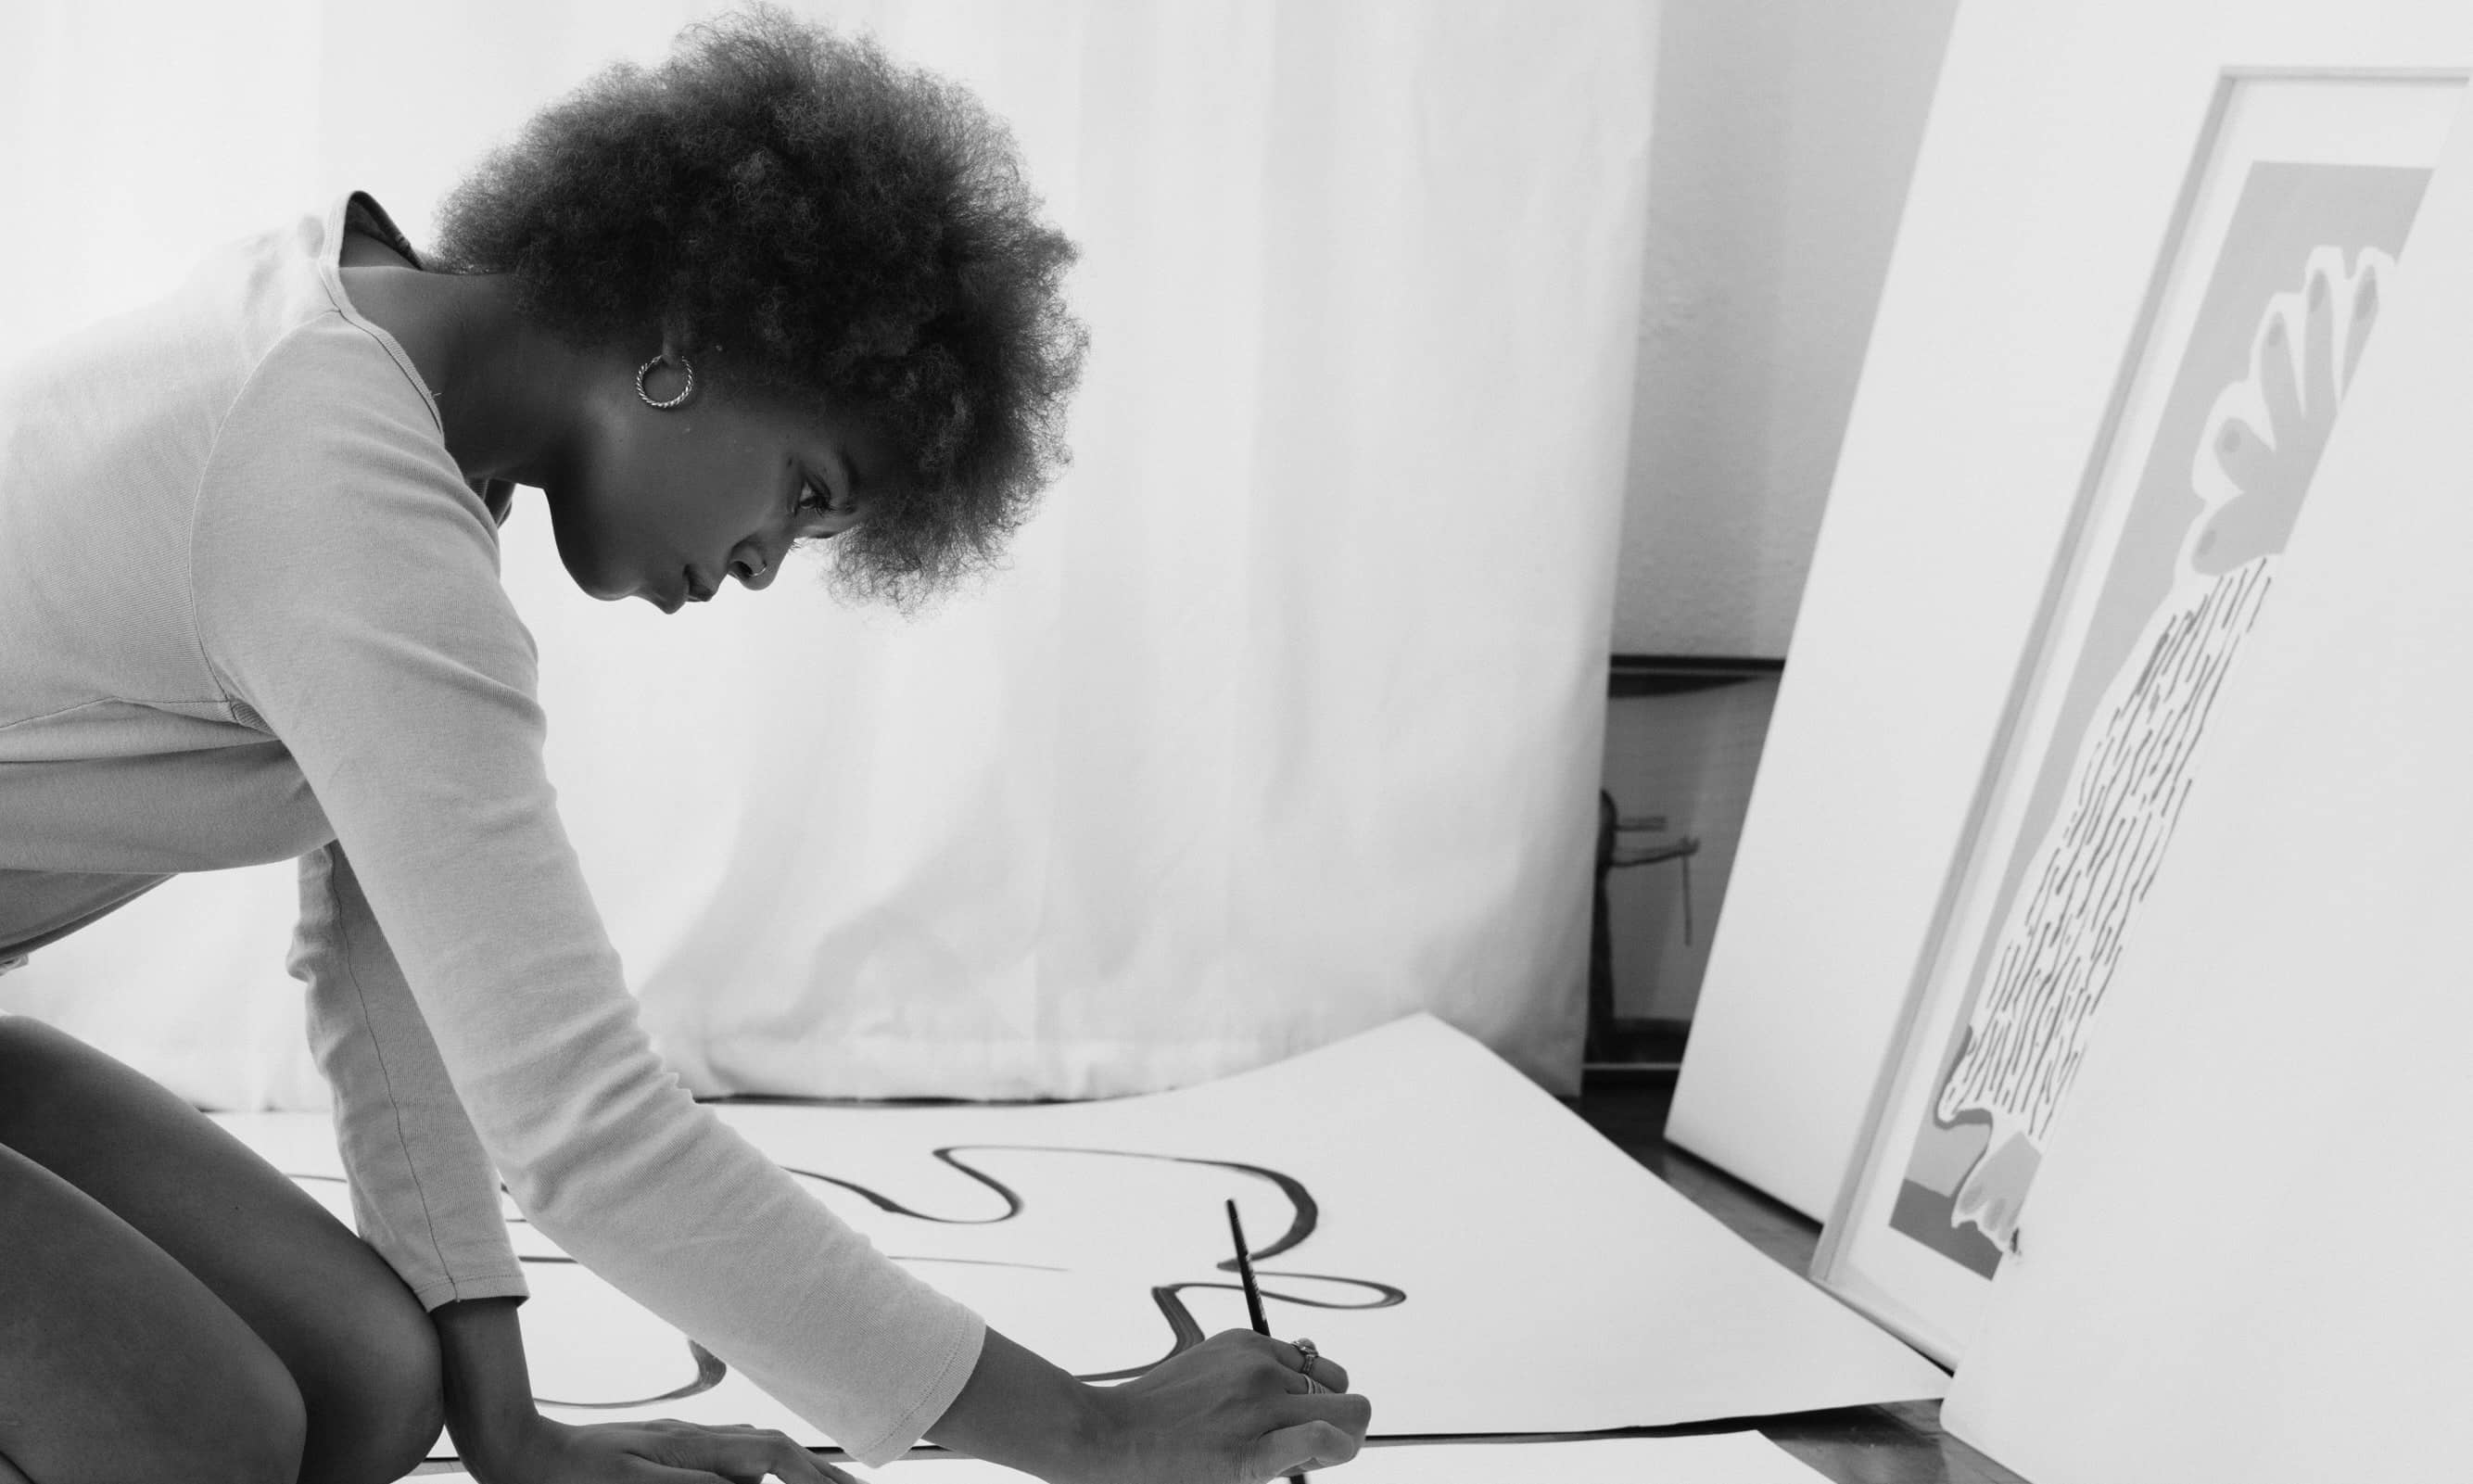 A black and white image of a women drawing on a big canvas